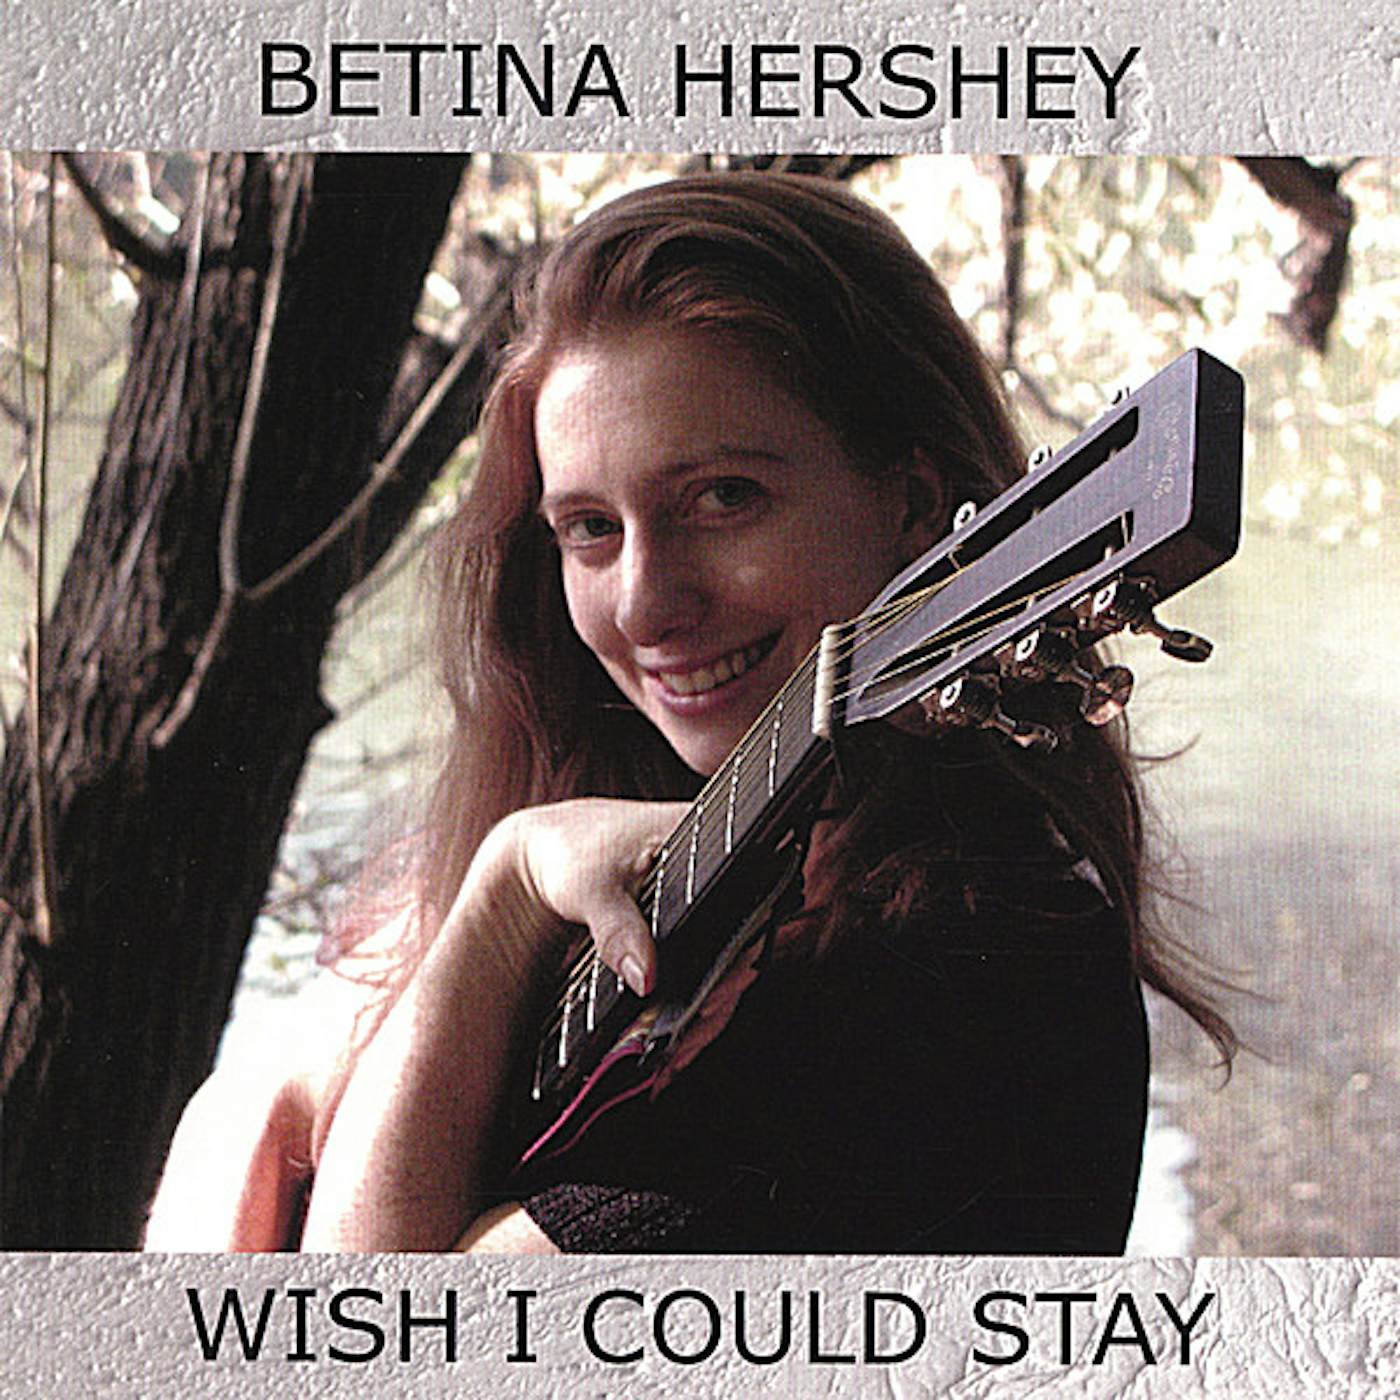 Betina Hershey WISH I COULD STAY CD